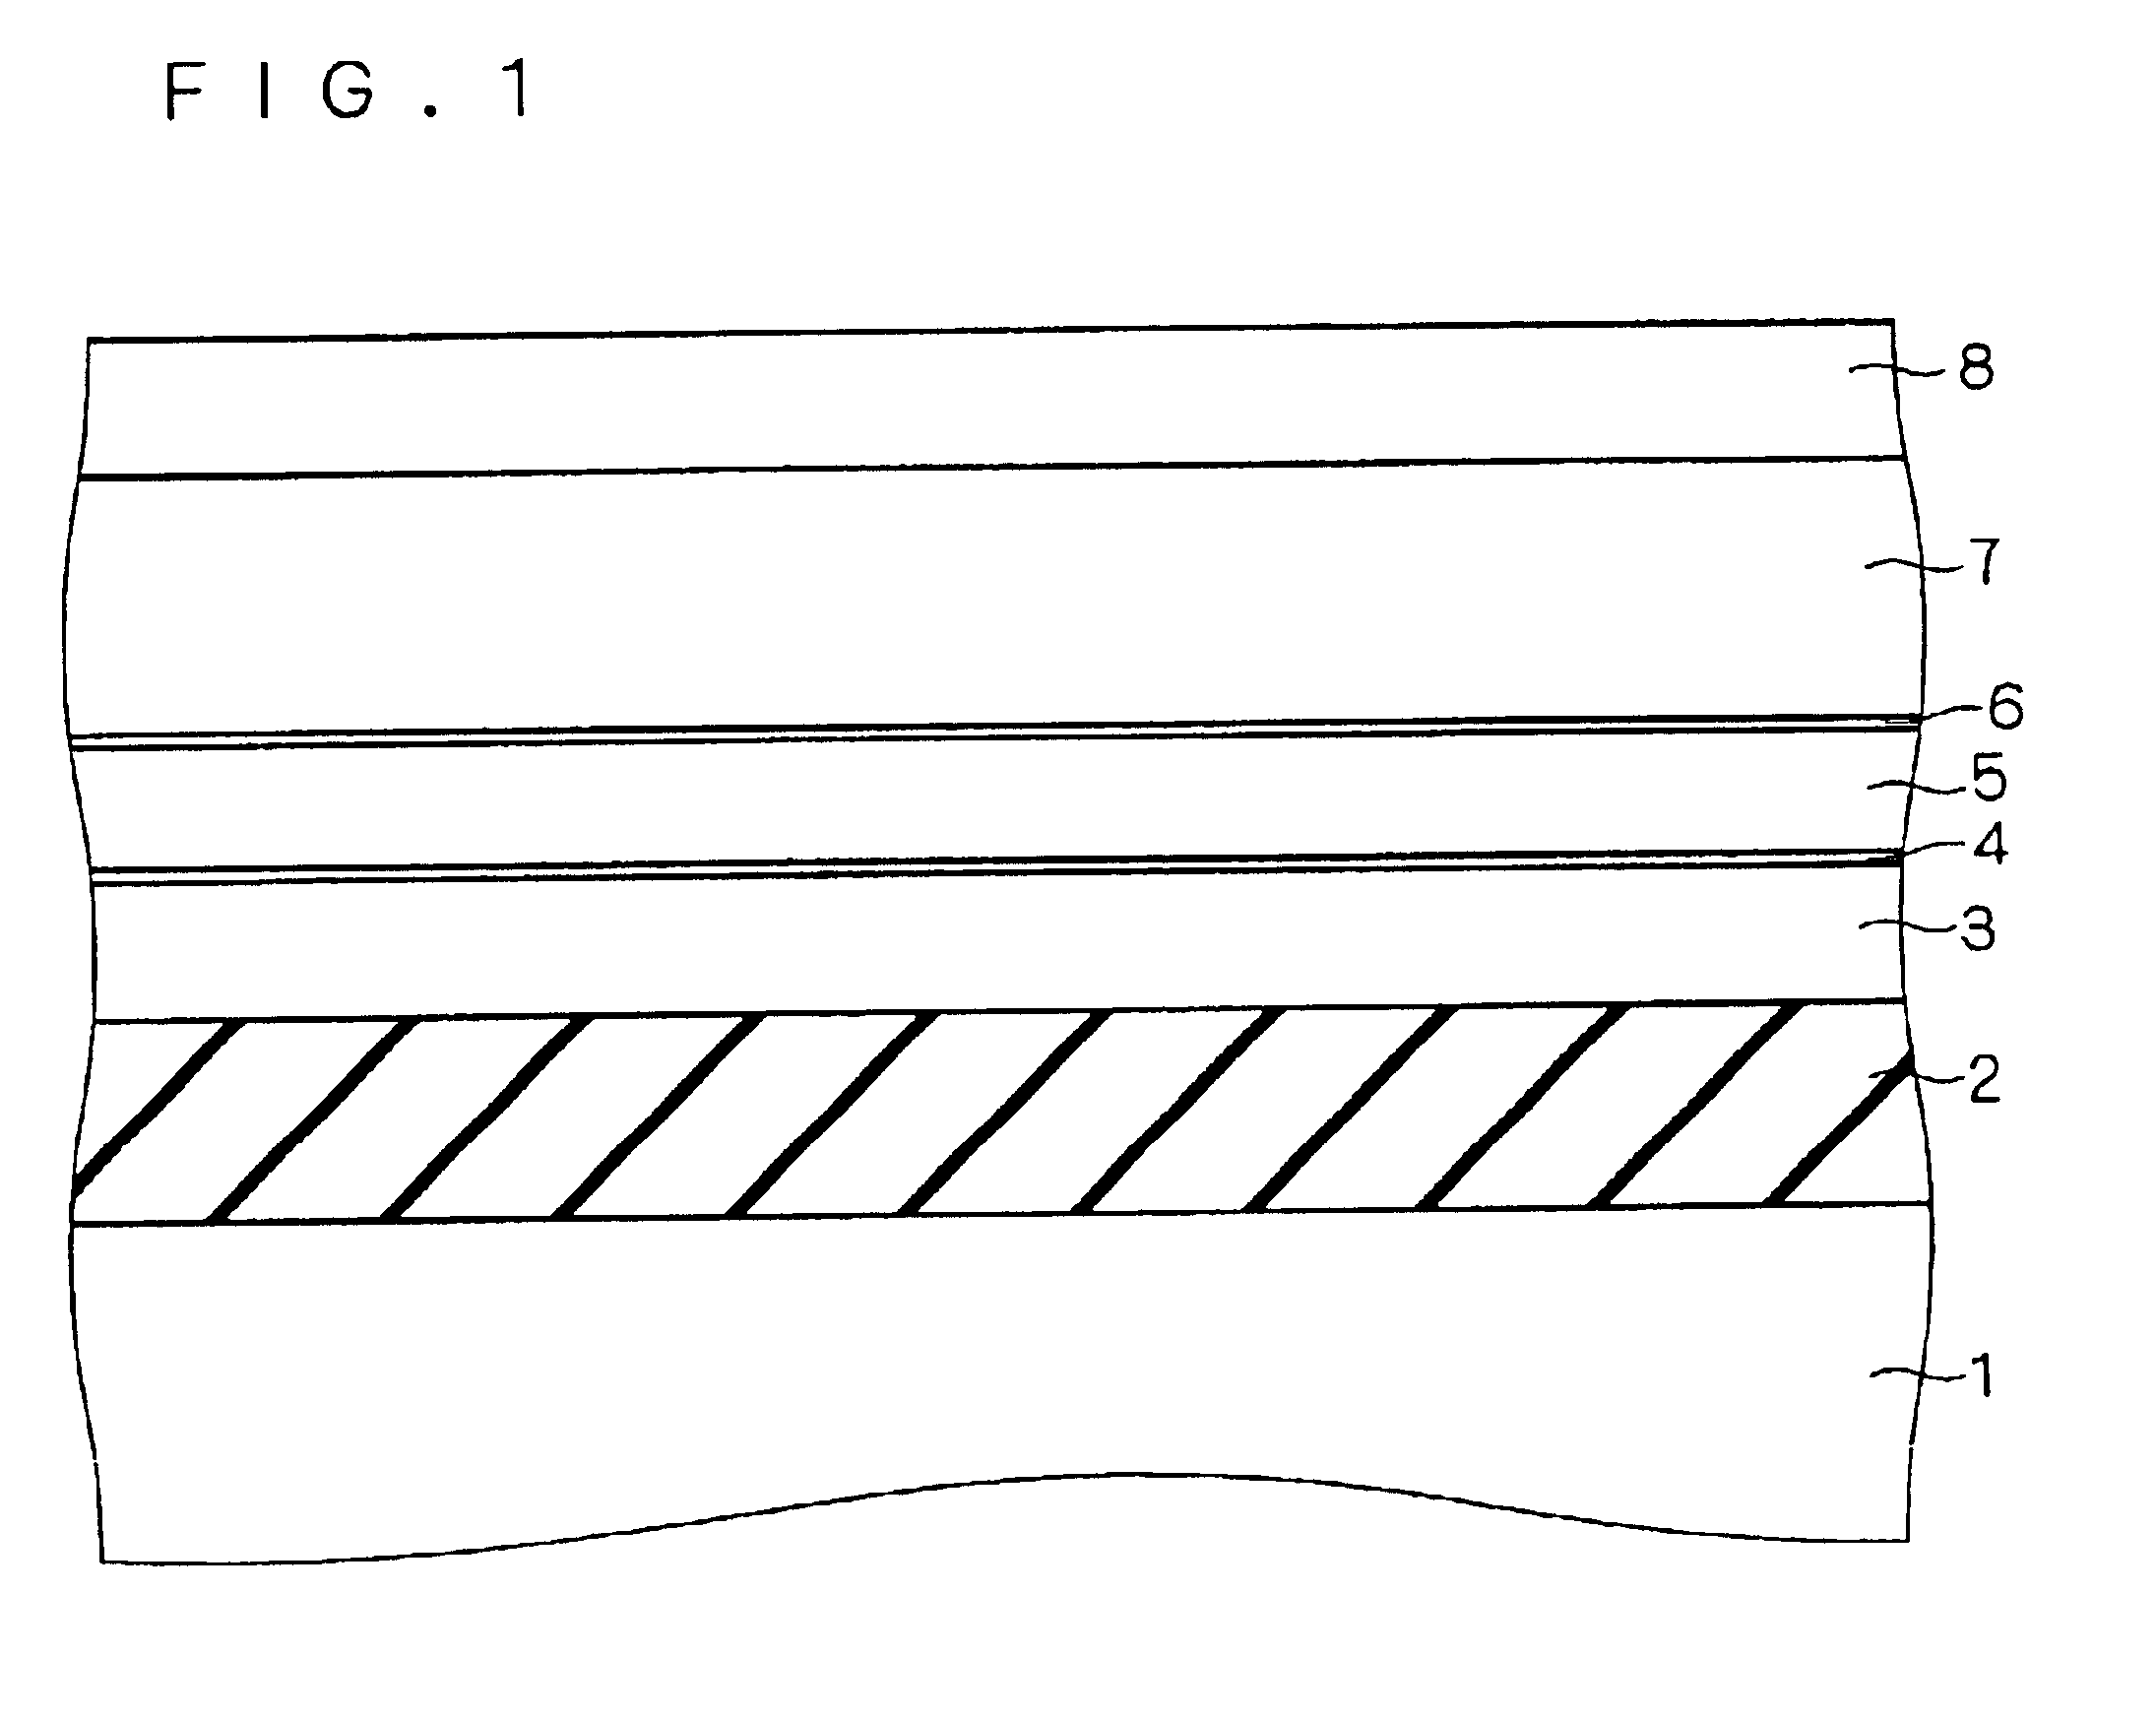 Semiconductor device having a trench isolation and method of fabricating the same